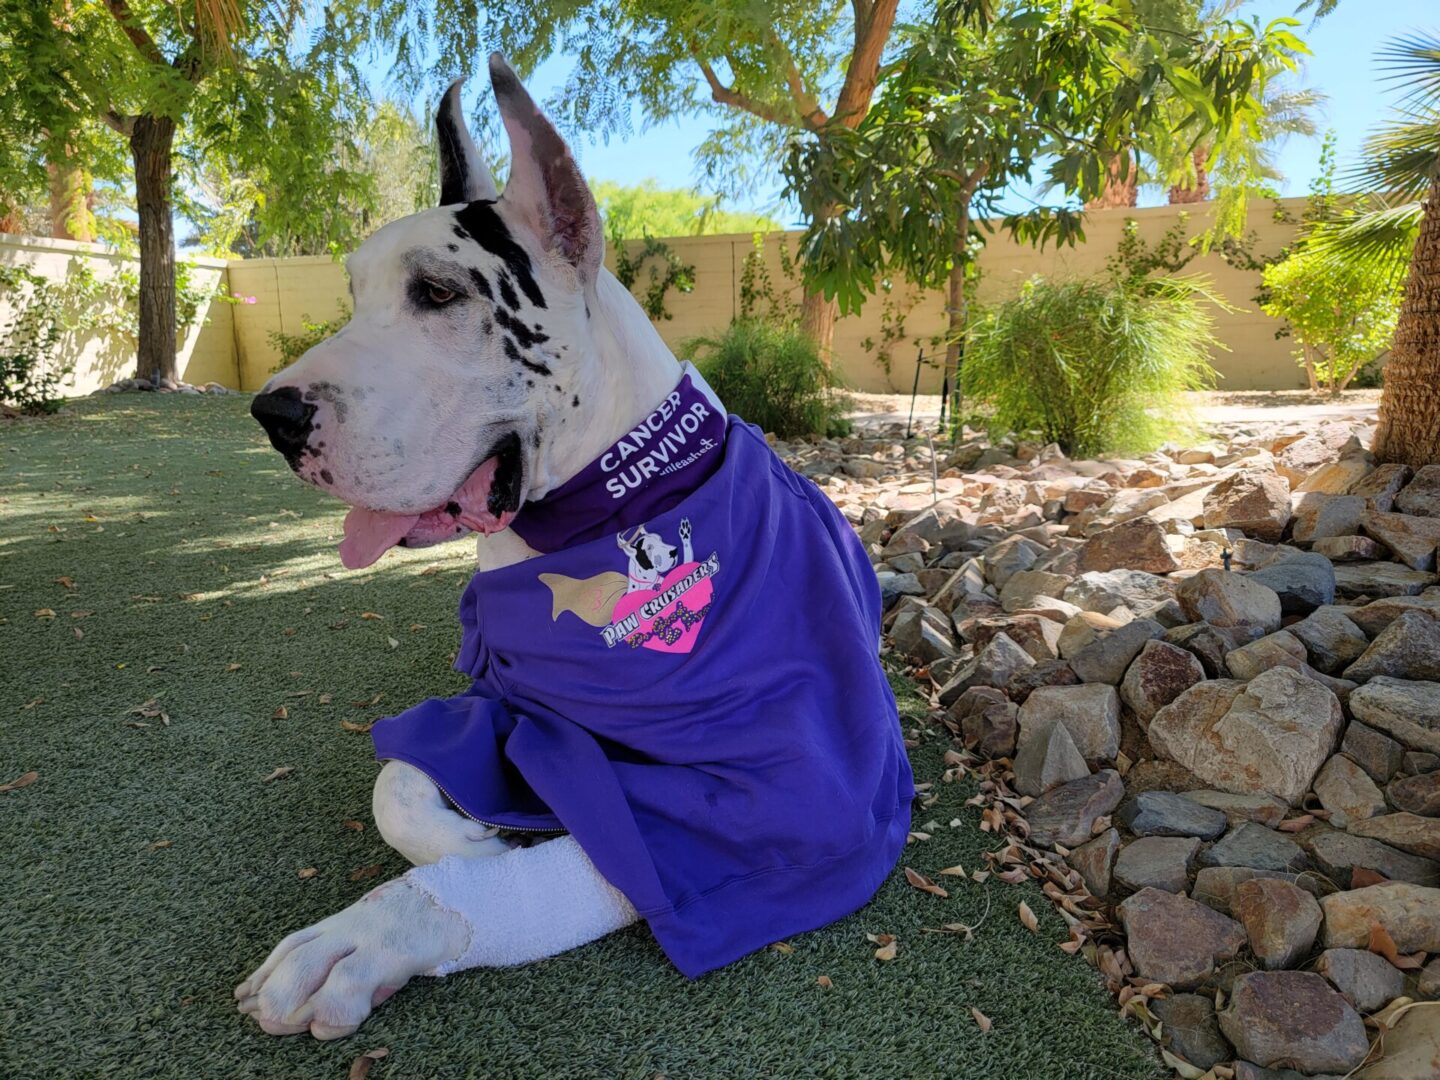 A dog sitting on the ground wearing a purple shirt.